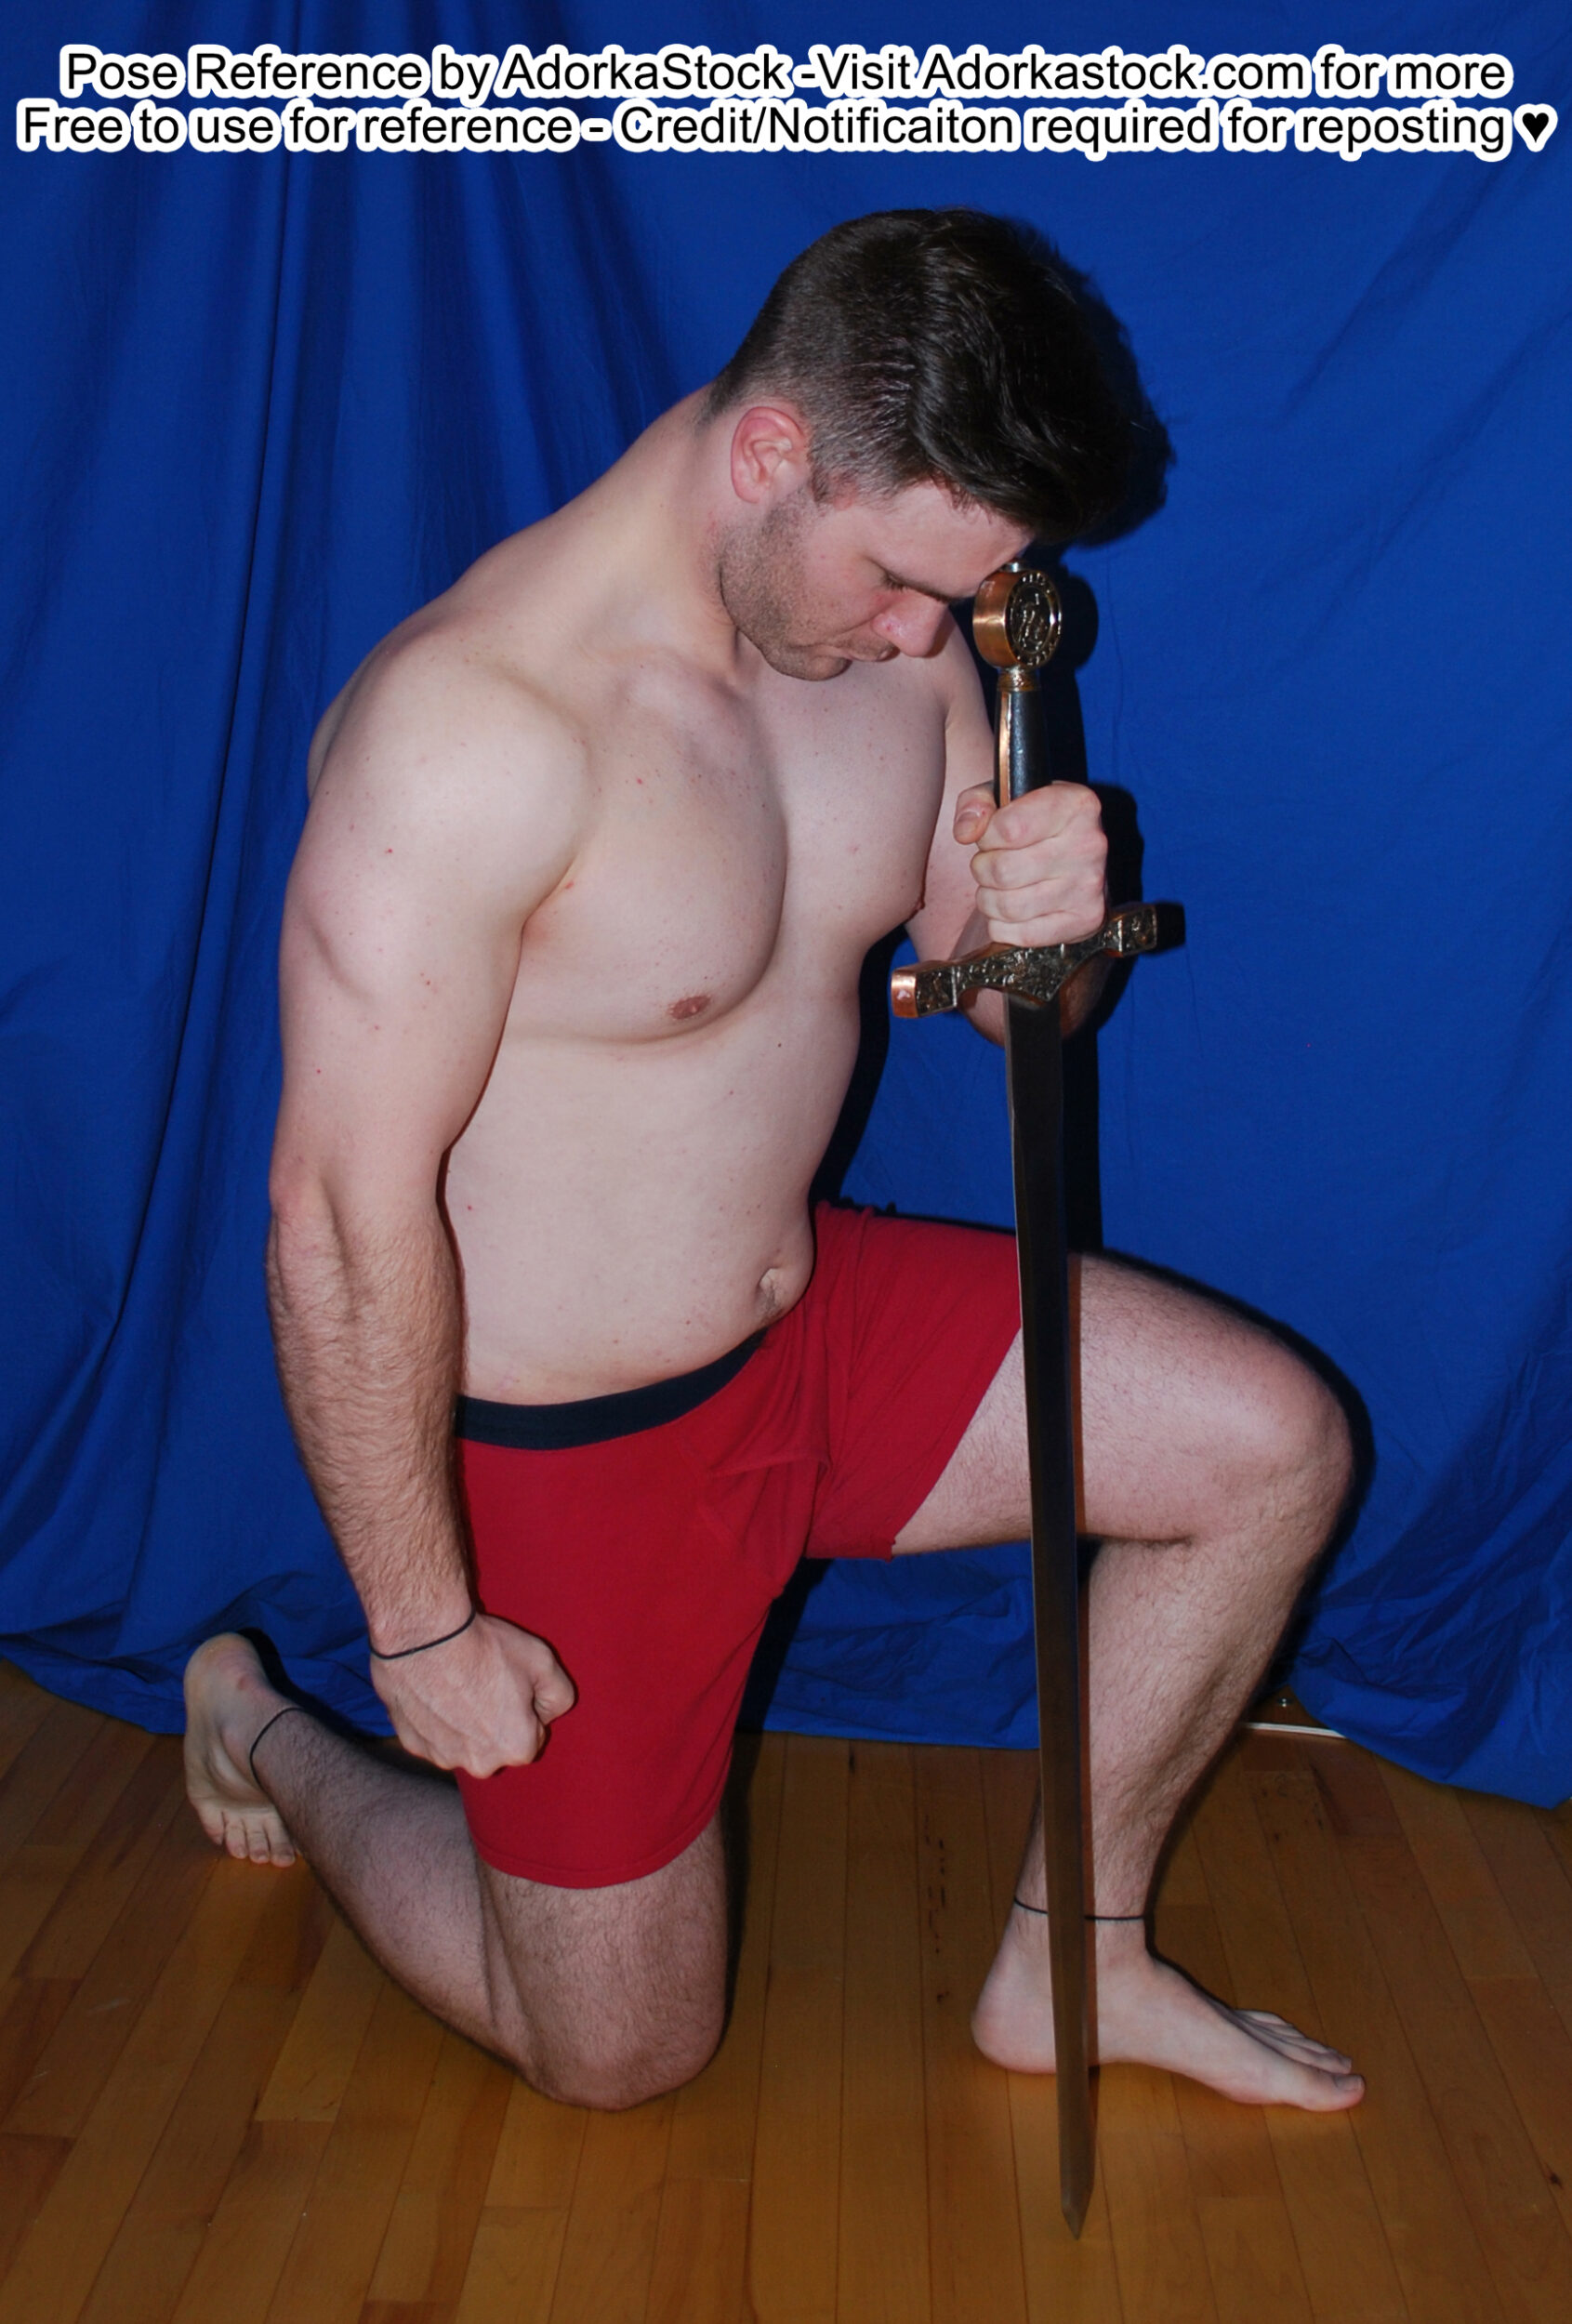 Fit, white, male pose reference model in kneeling pose with one knee up, hand on the hilt of a sword which his forehead rests on.